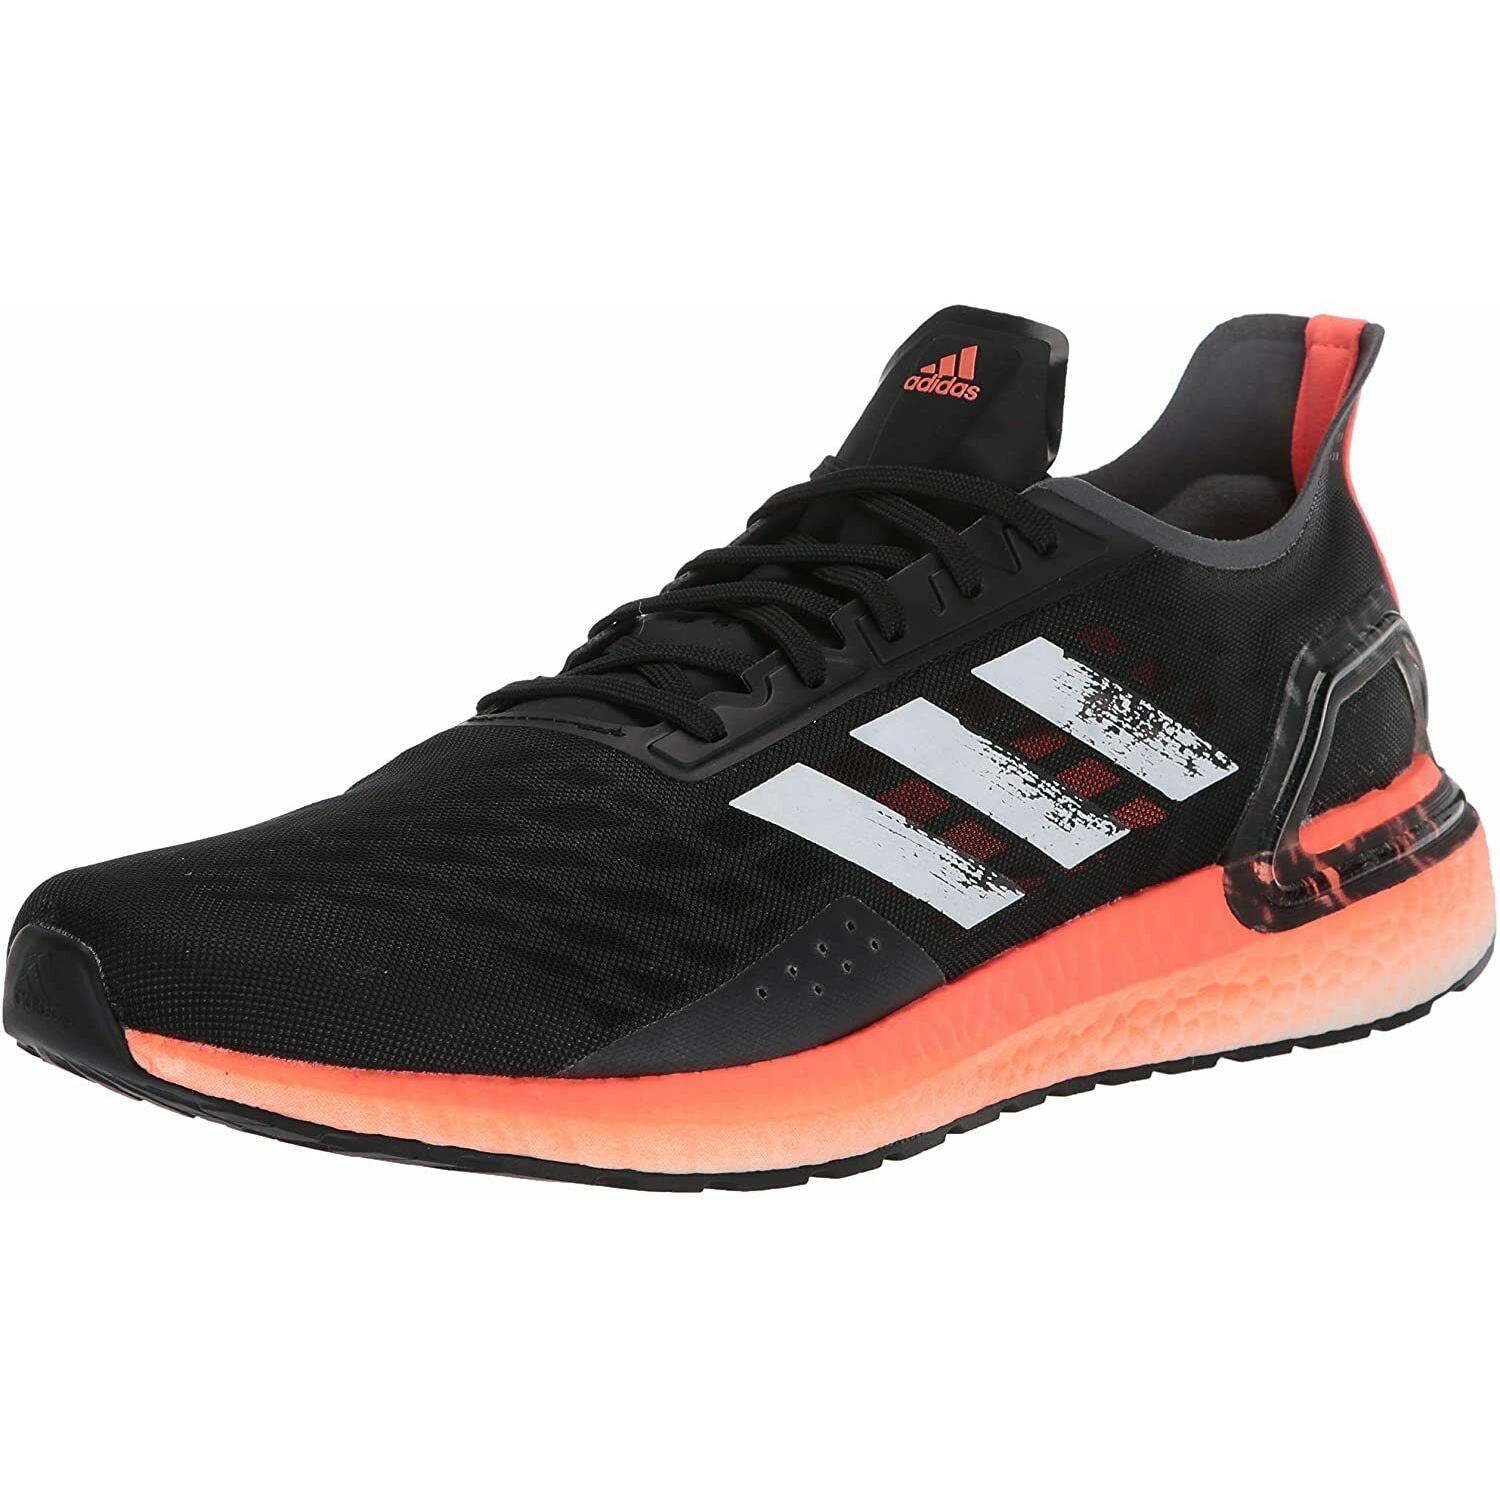 Adidas Men`s Ultraboost PB Running Shoes EG0427 Size 9 US in The Box - Black/White/Signal Coral